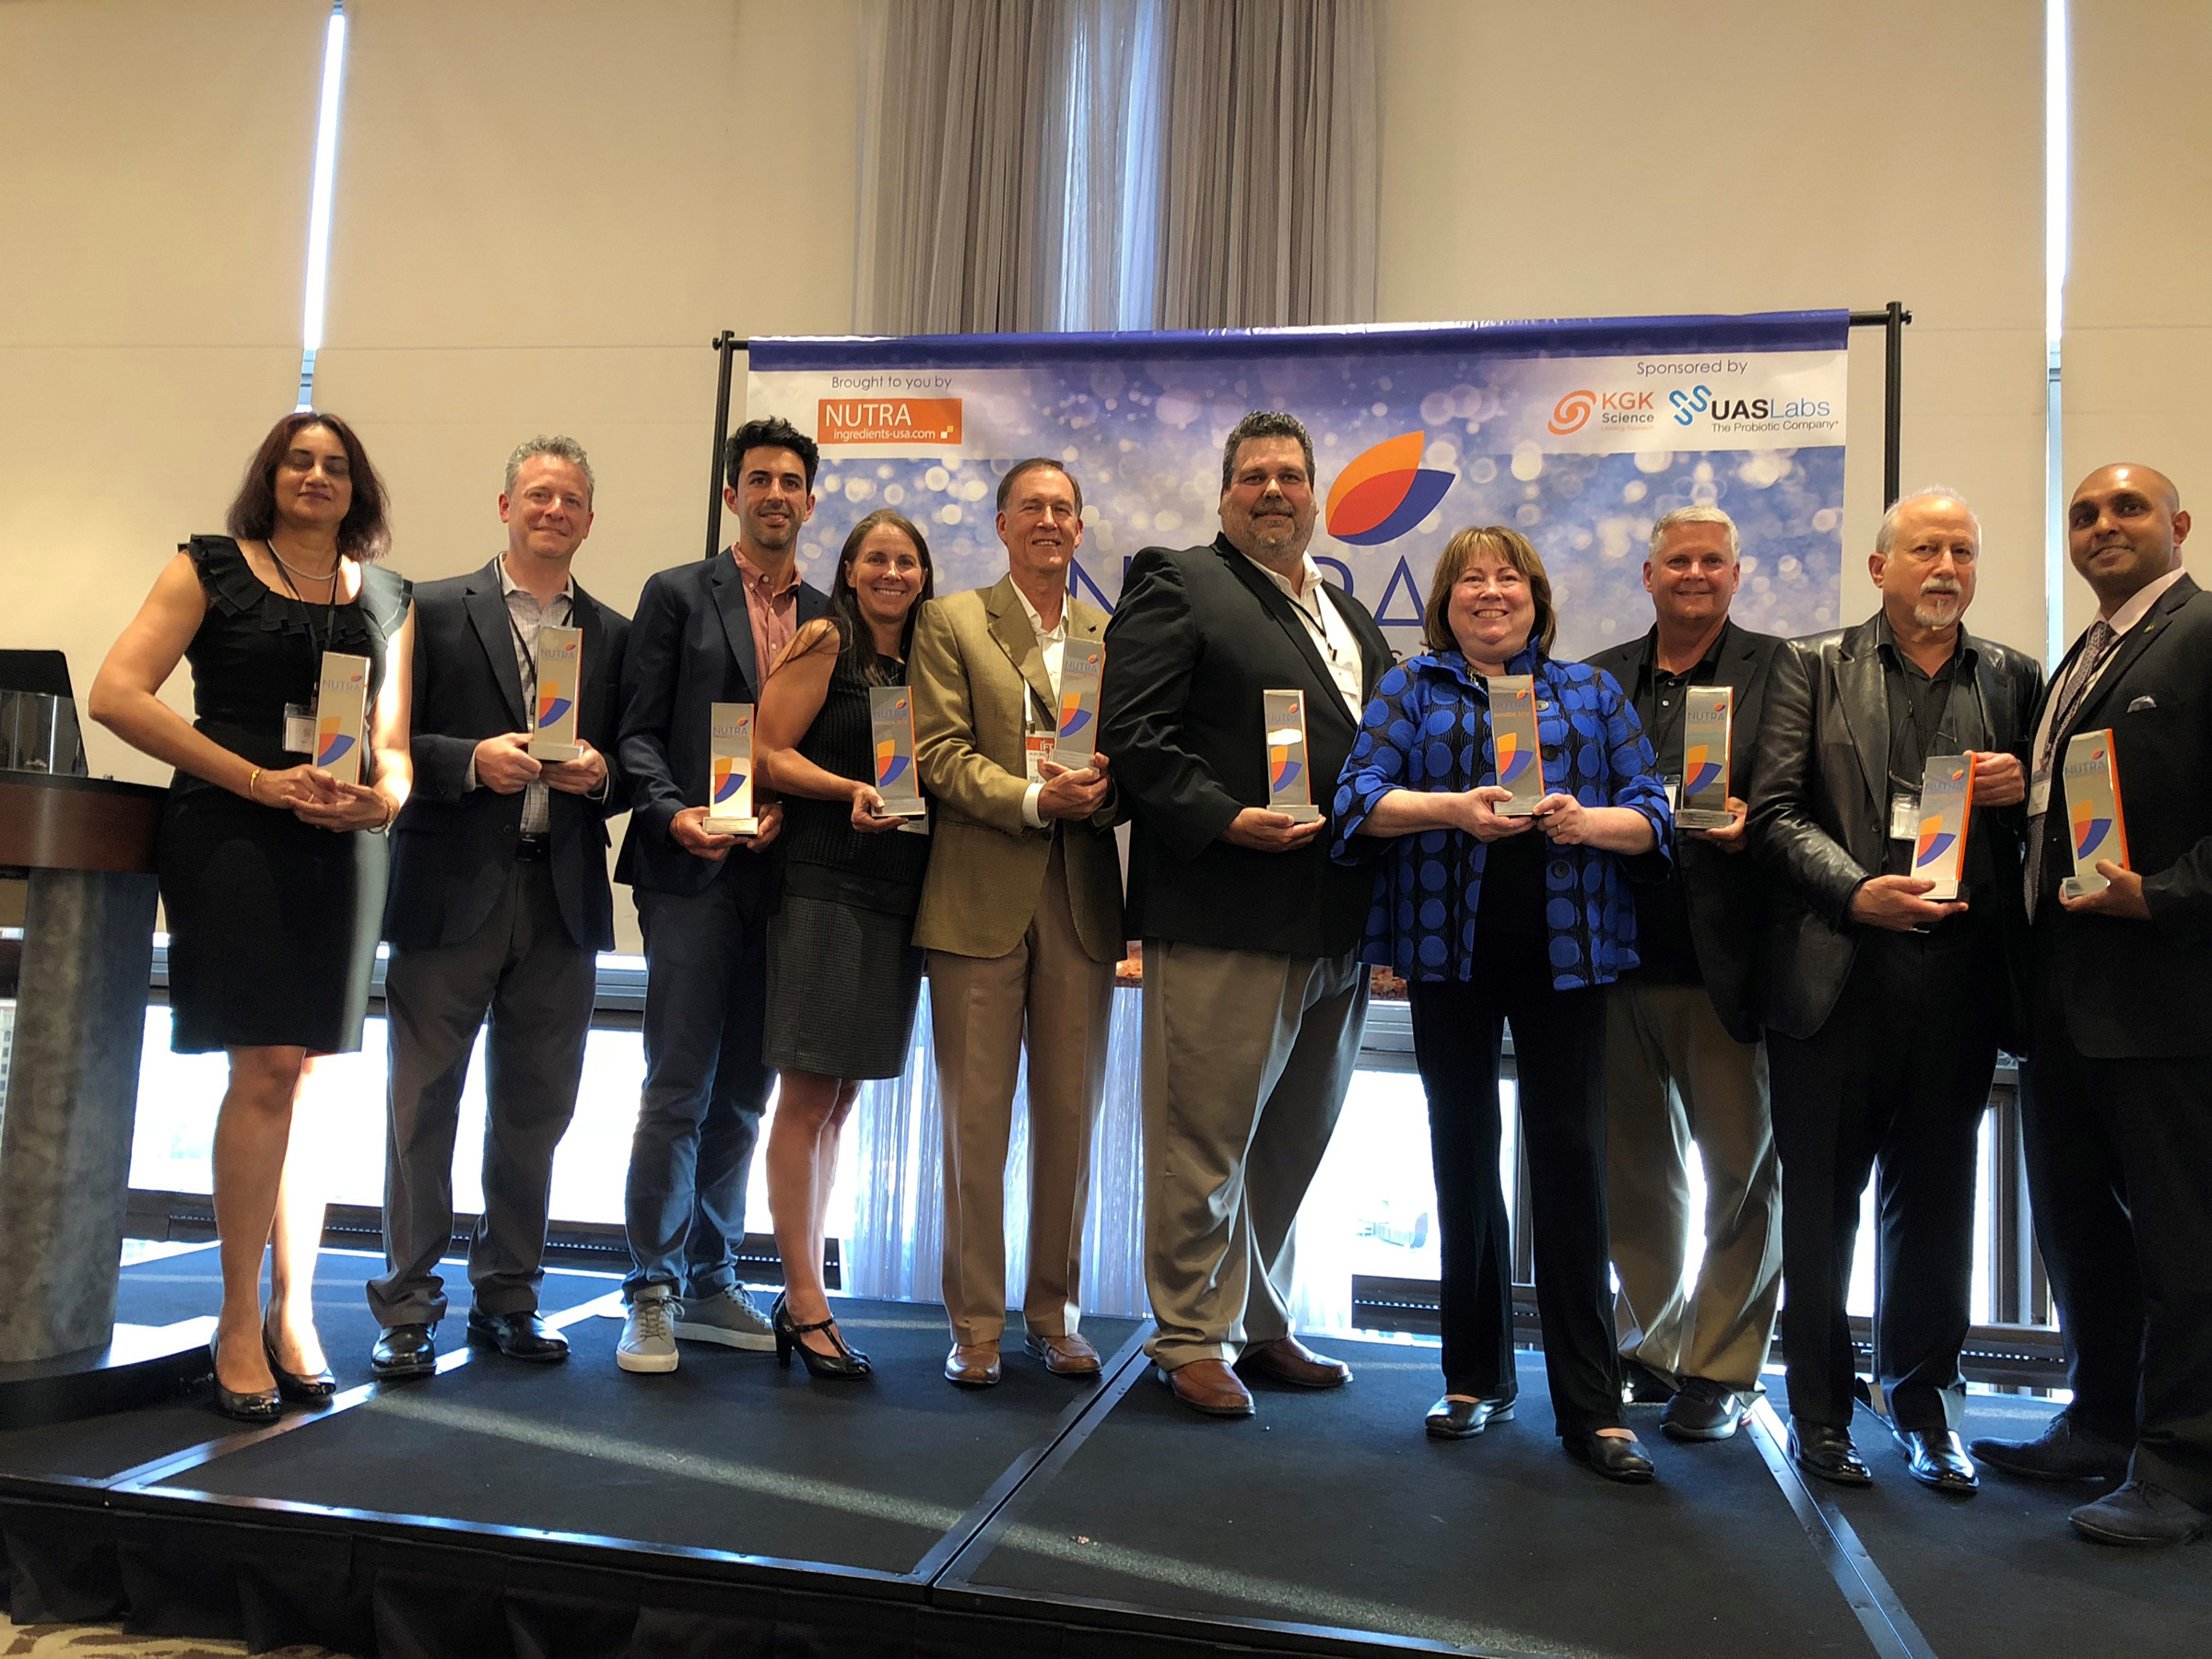 DuPont Nutrition & Health received the prestigious NutraIngredients-USA “Ingredient of the Year Award 2018”